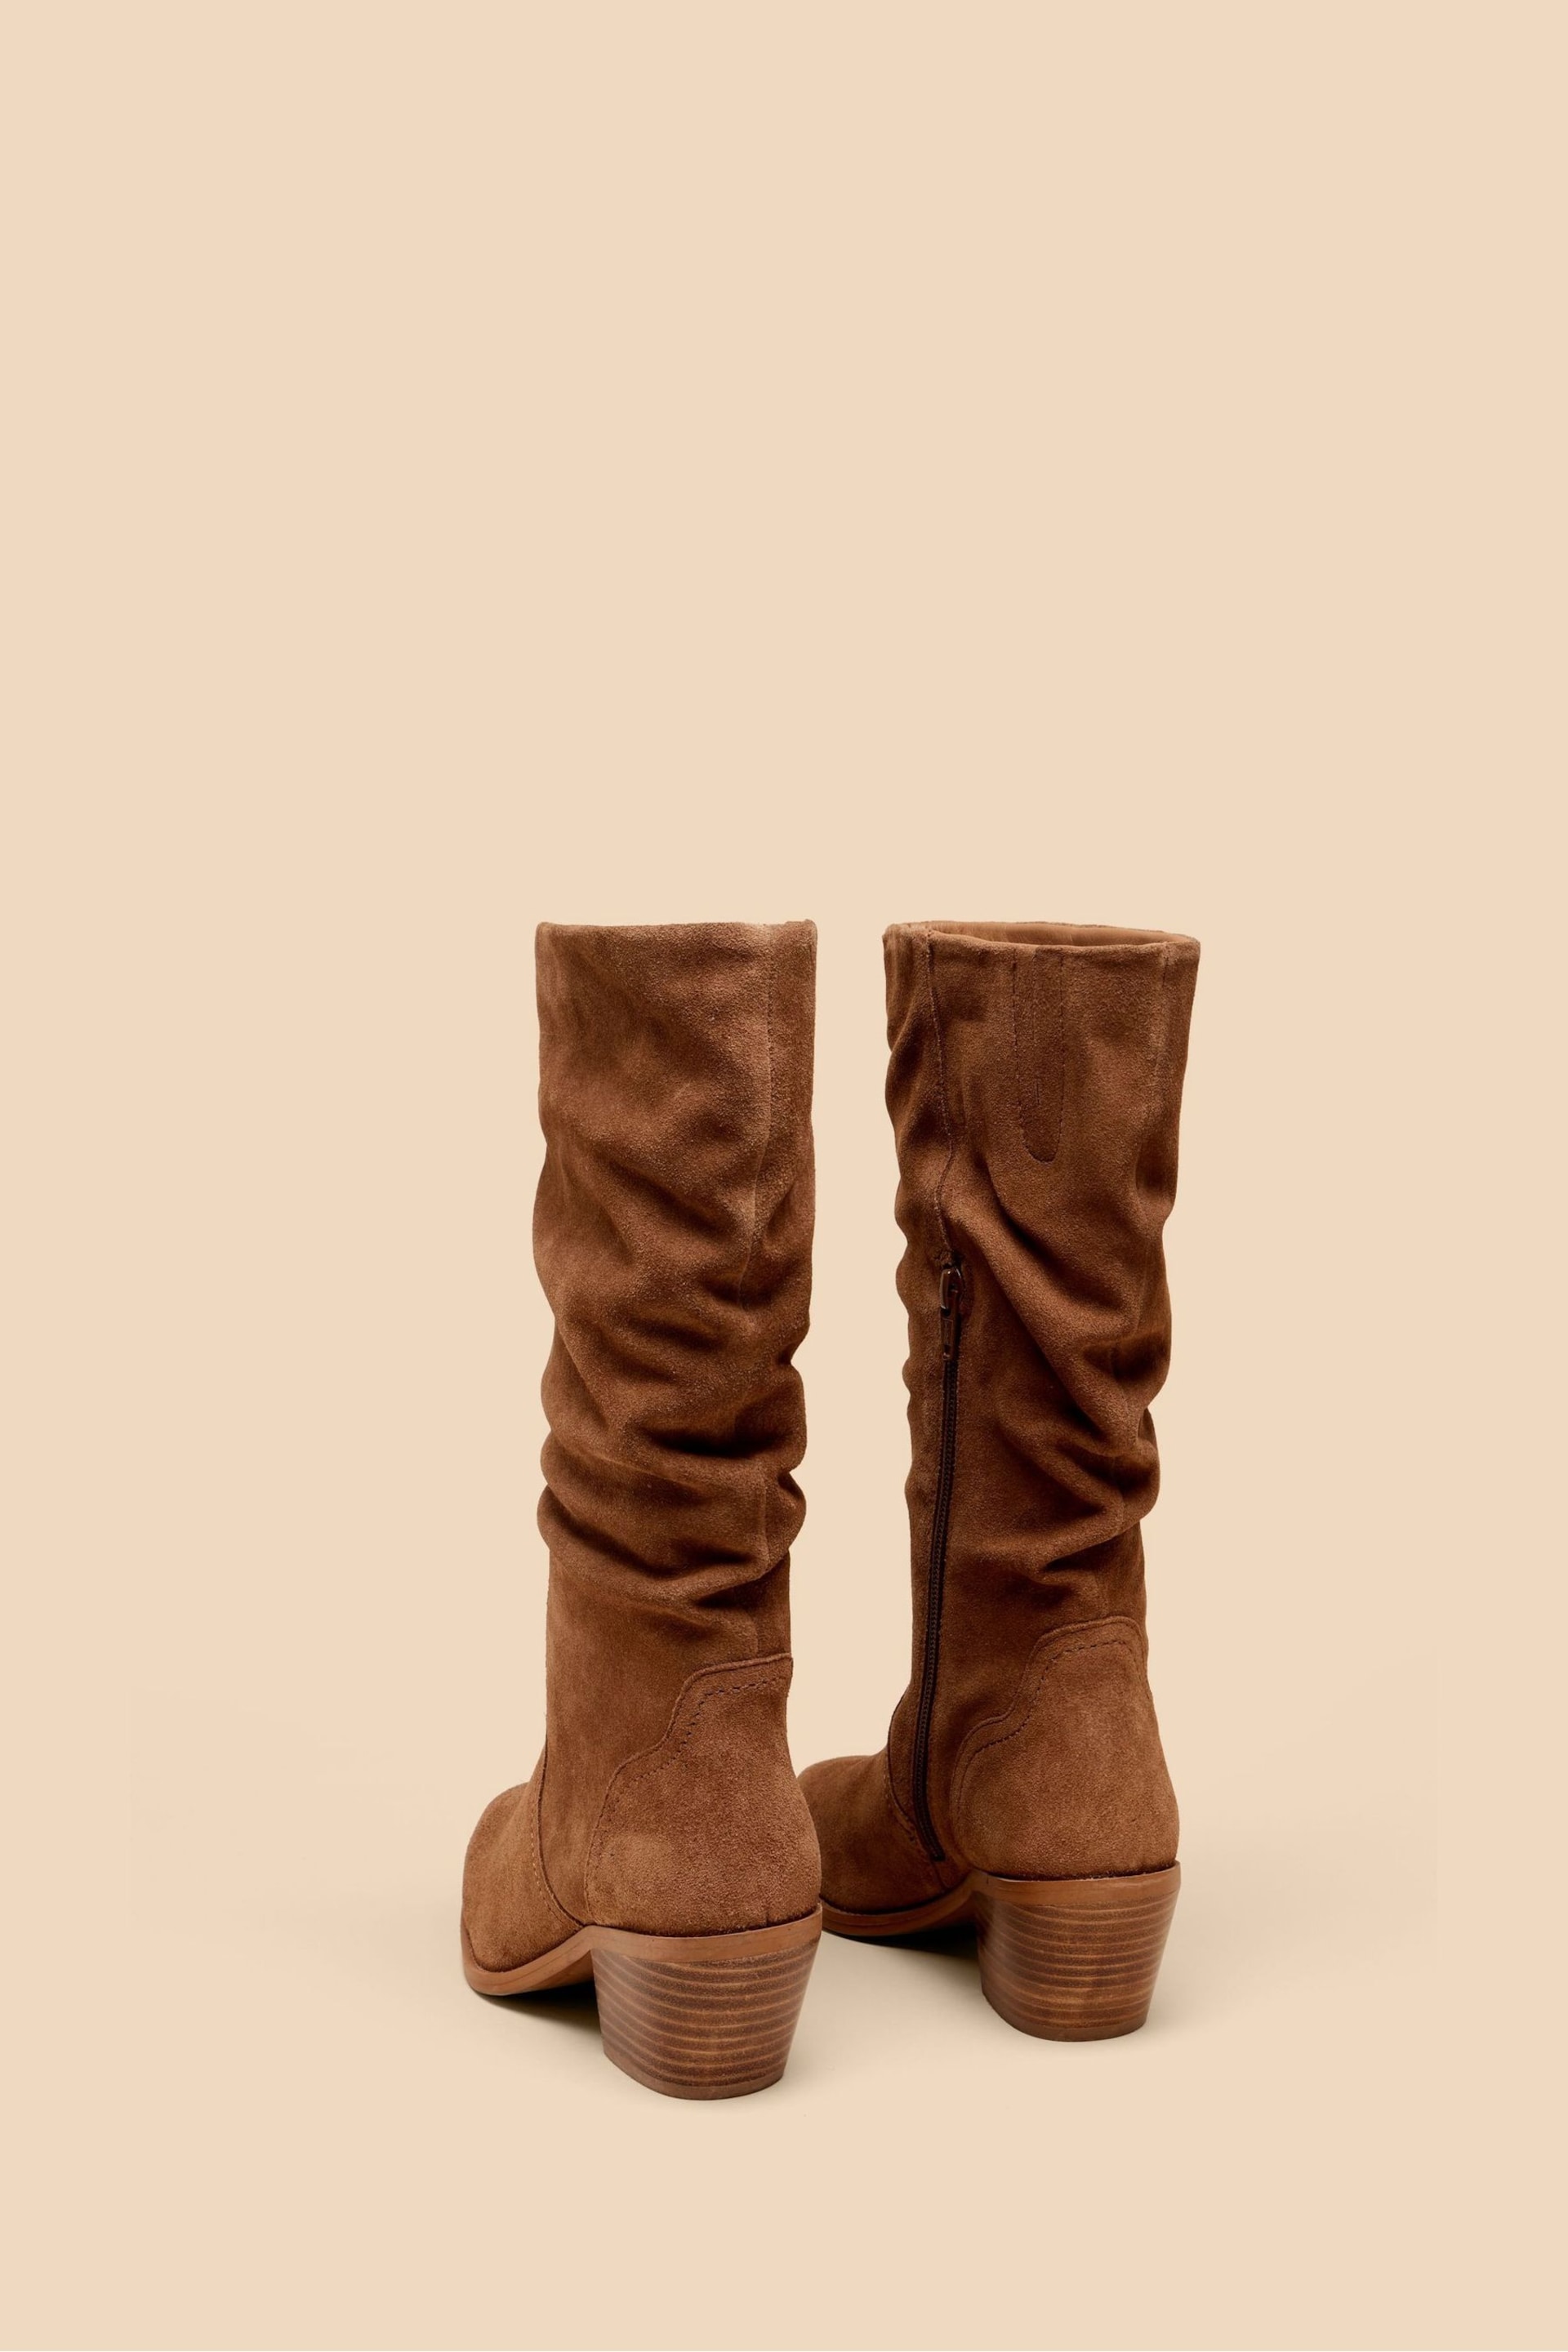 White Stuff Brown Azalea Suede Mid Slouch Boots - Image 3 of 4